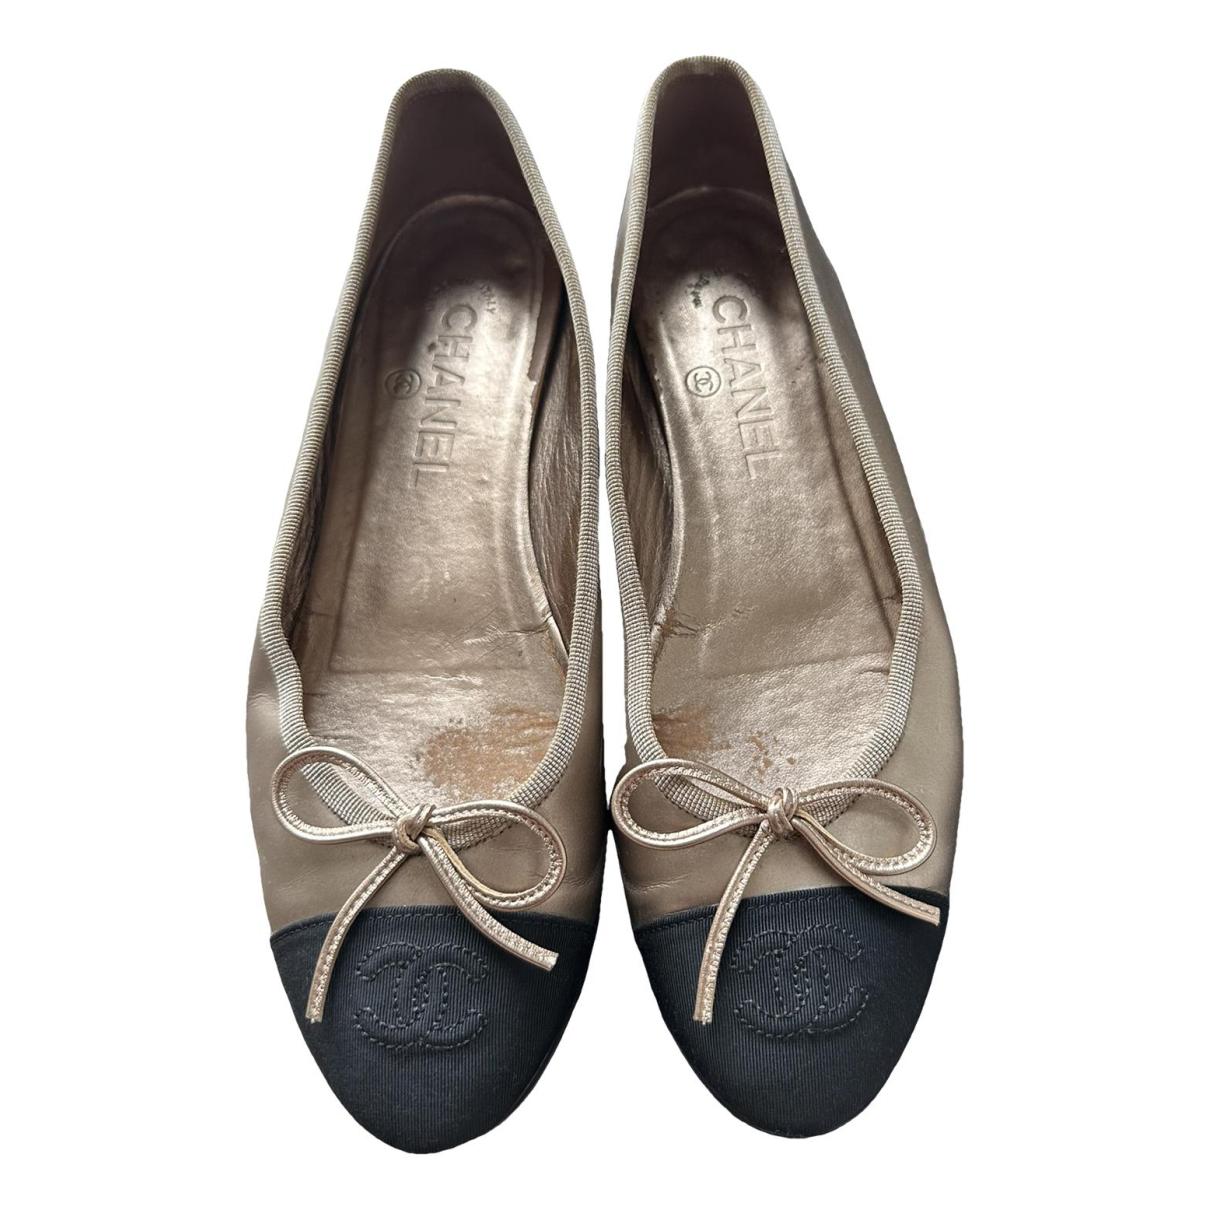 Cambon leather ballet flats Chanel Beige size 37 EU in Leather - 35591724